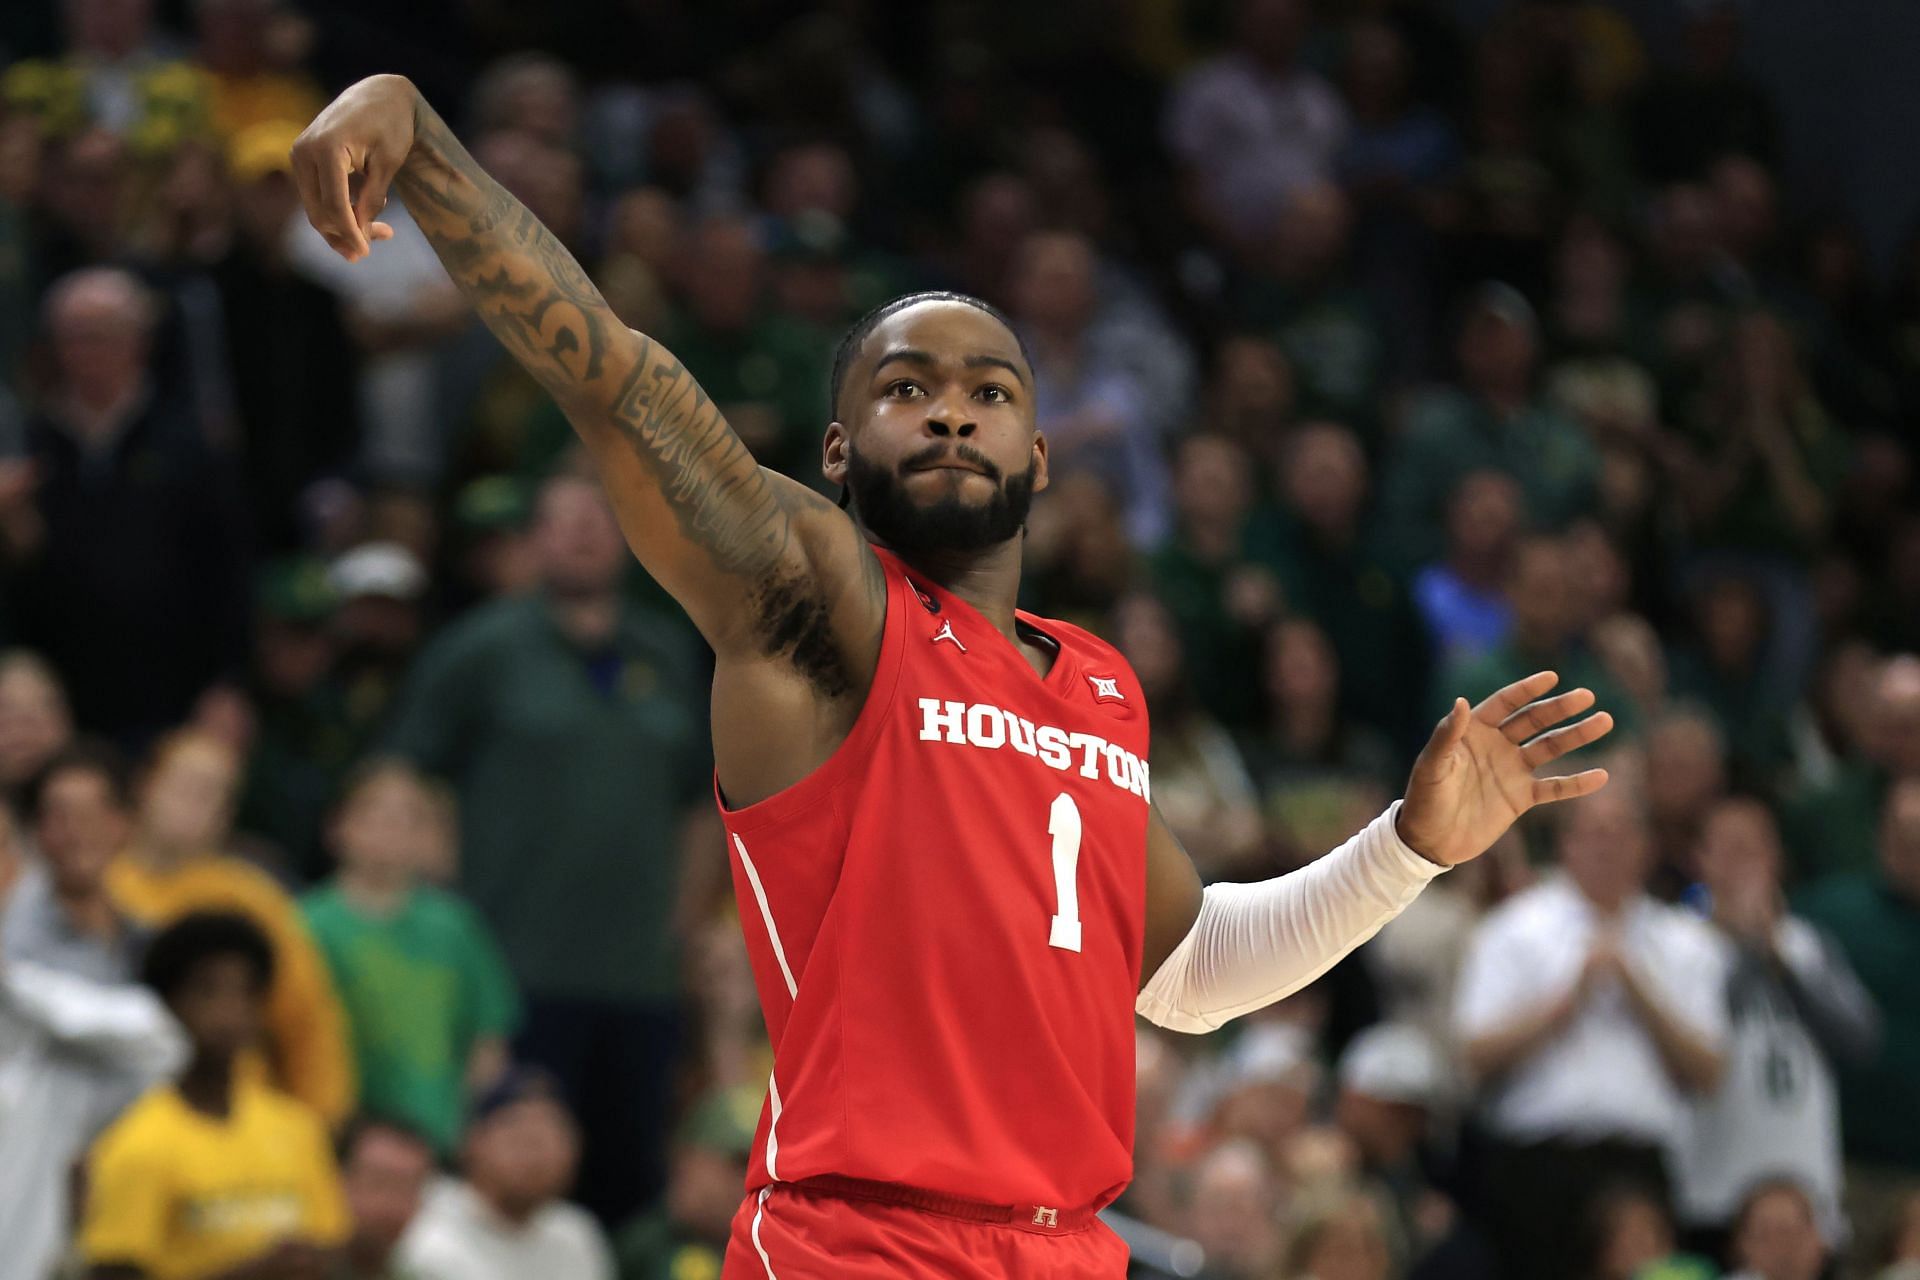 Jamal Shead leads No. 1 Houston in assists and steals this season